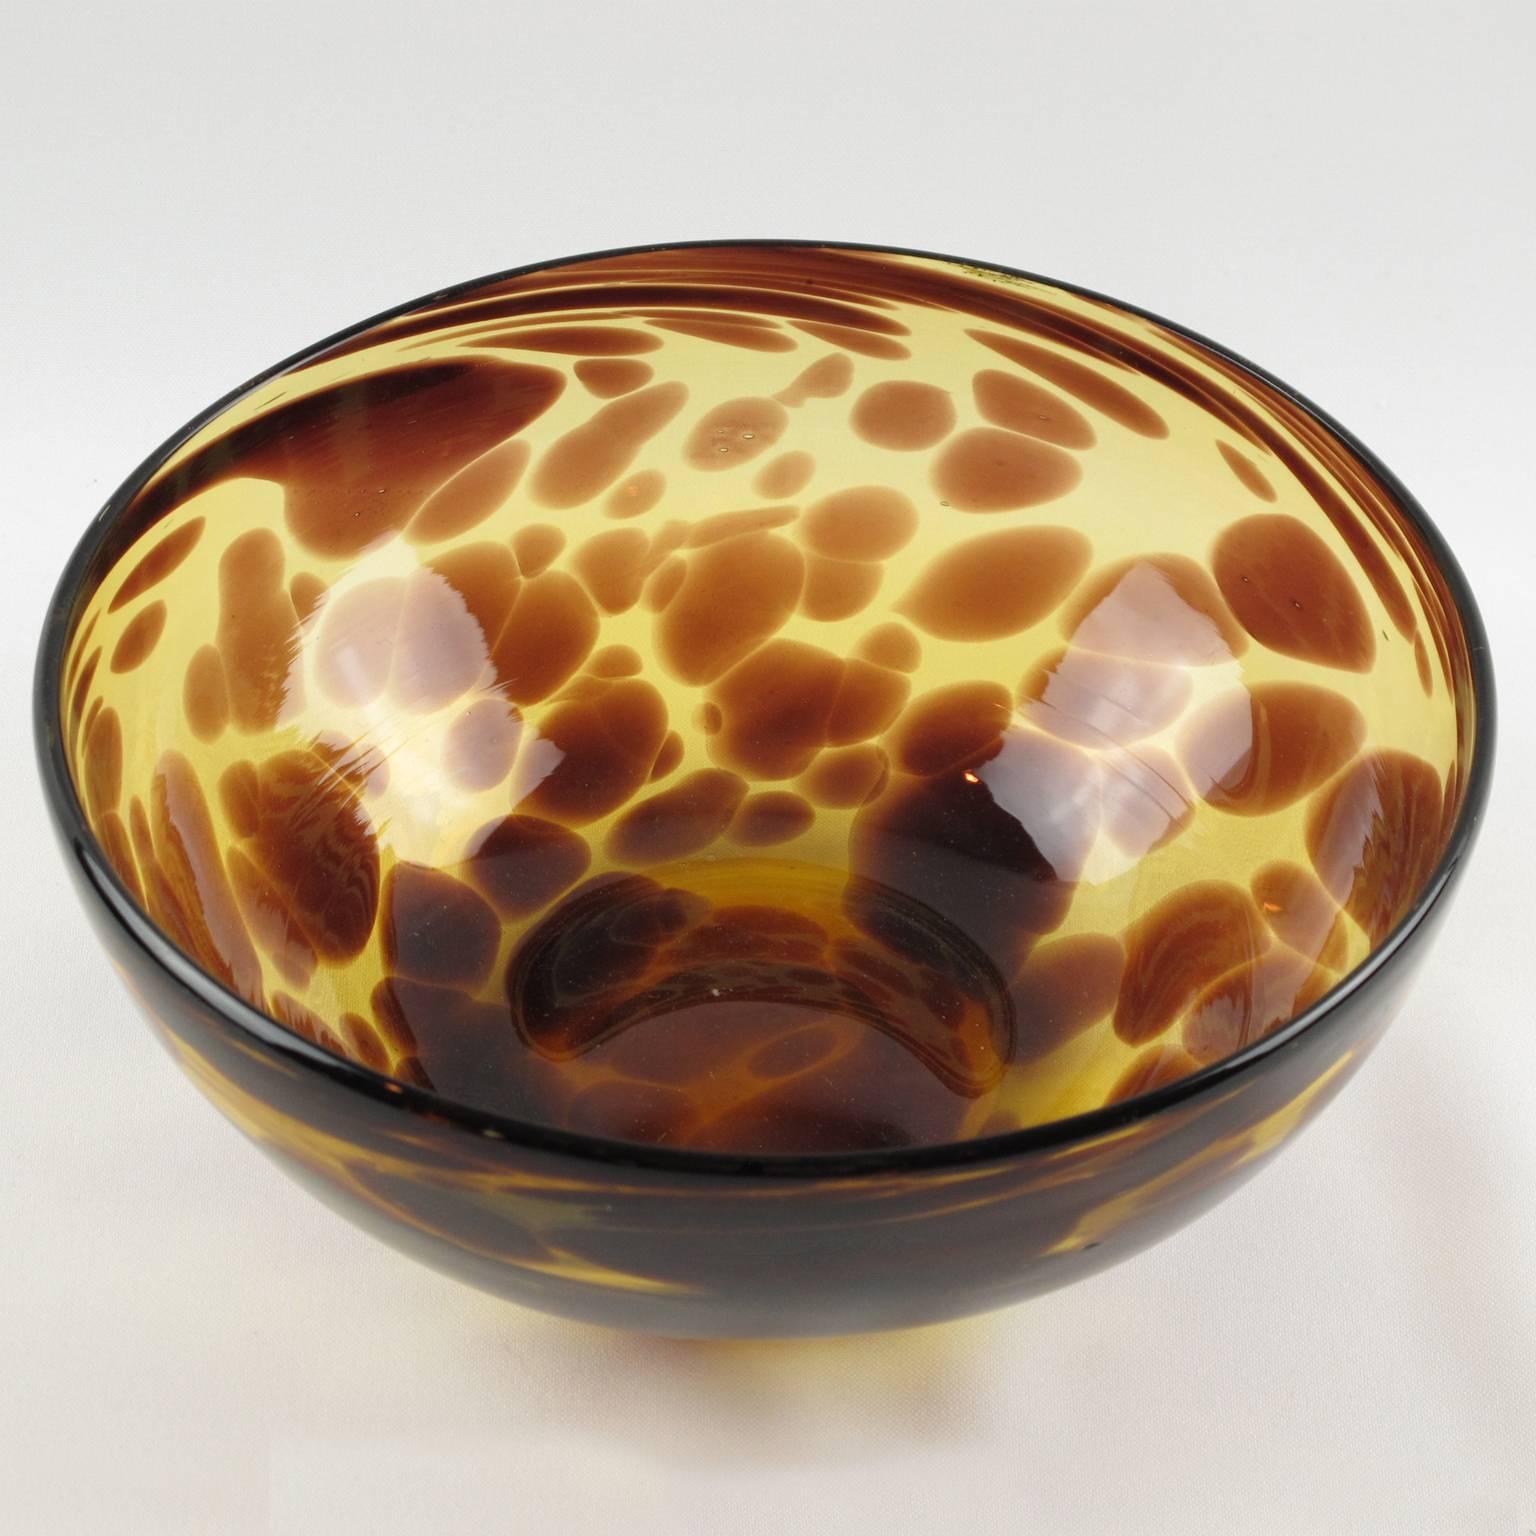 Vintage French Designer Christian Dior Glass Bowl. From the Dior Home Collection mouth-blown in Empoli, Italy in the 1960s. Exclusive tortoise shell color flowing pattern. Polished pontil mark on the bottom. Excellent condition.

Measurements: